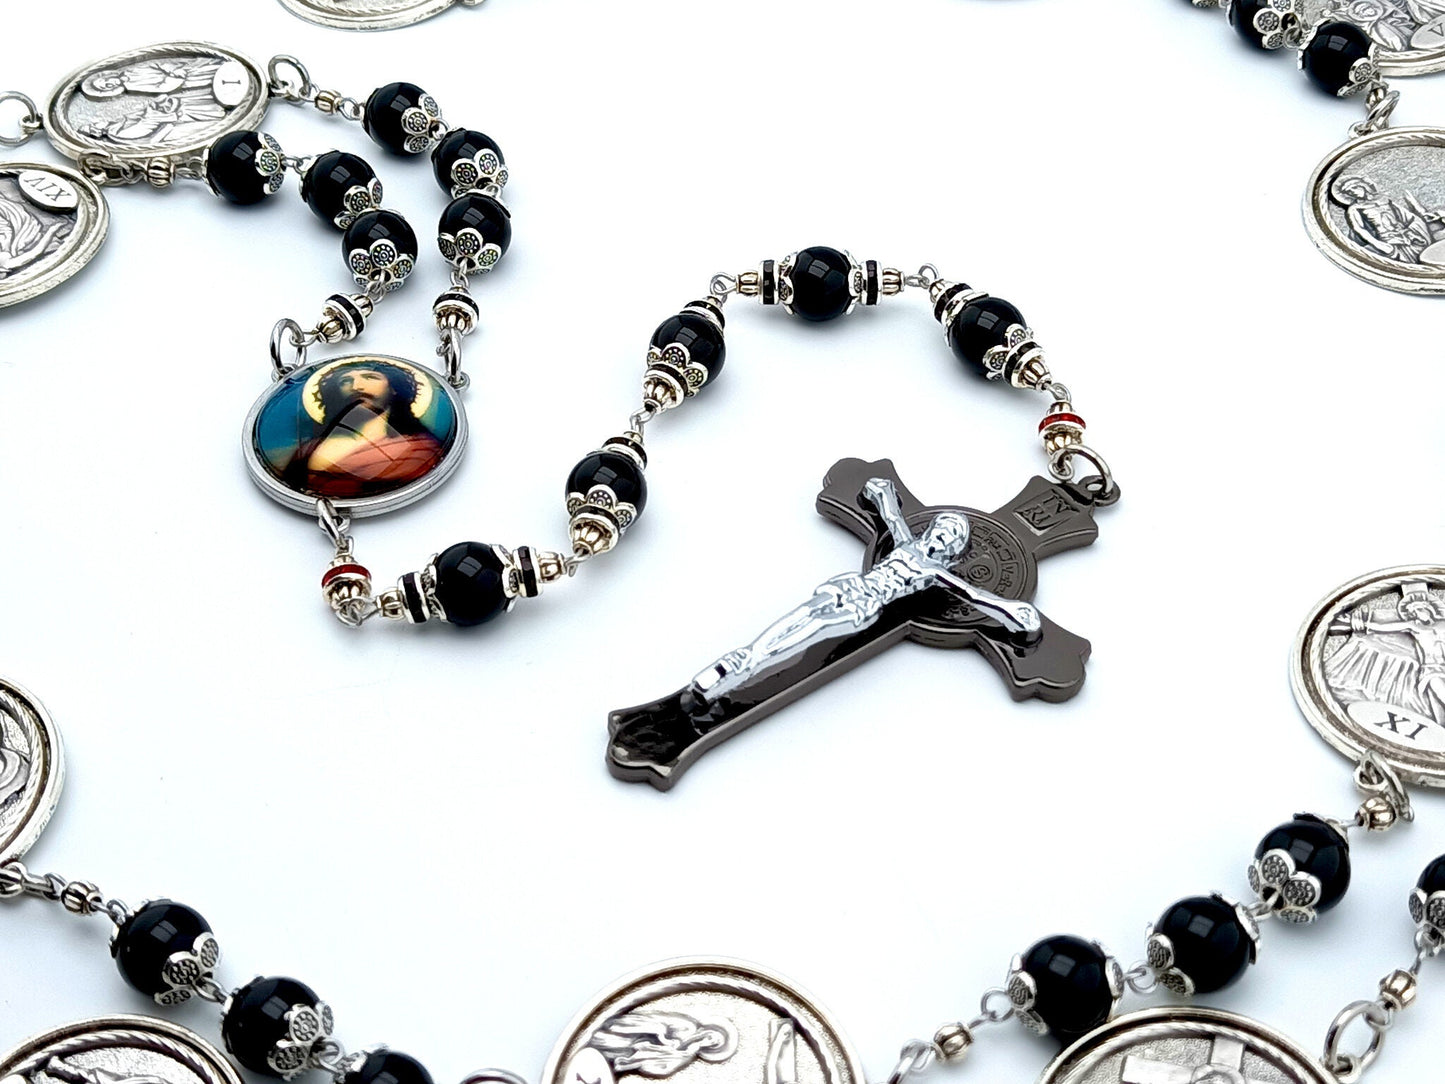 Way of the Cross unique rosary beads chaplet with onyx beads, silver picture medals, black Saint Benedict crucifix, picture centre medal and silver bead caps.